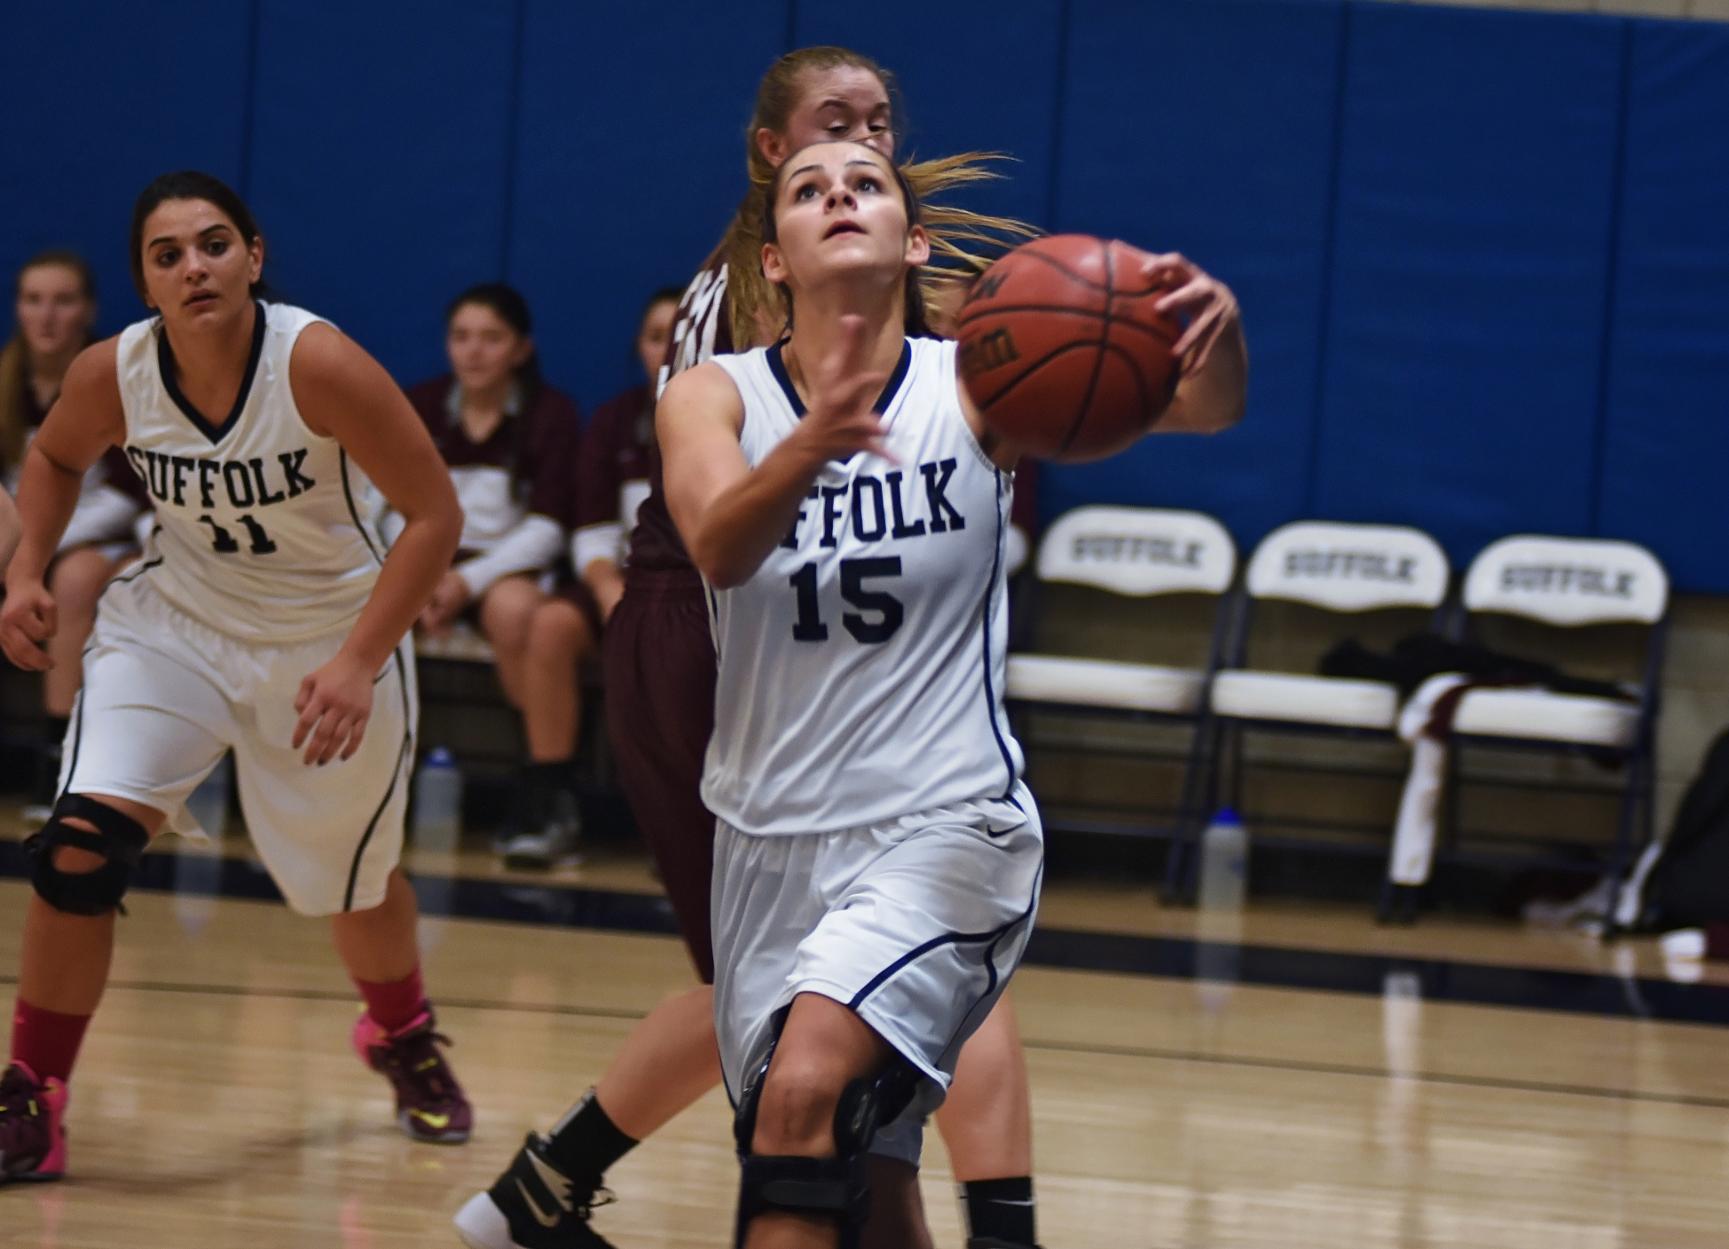 Women’s Basketball Races to Fifth Straight Win, Downs Mt. Ida, 80-68